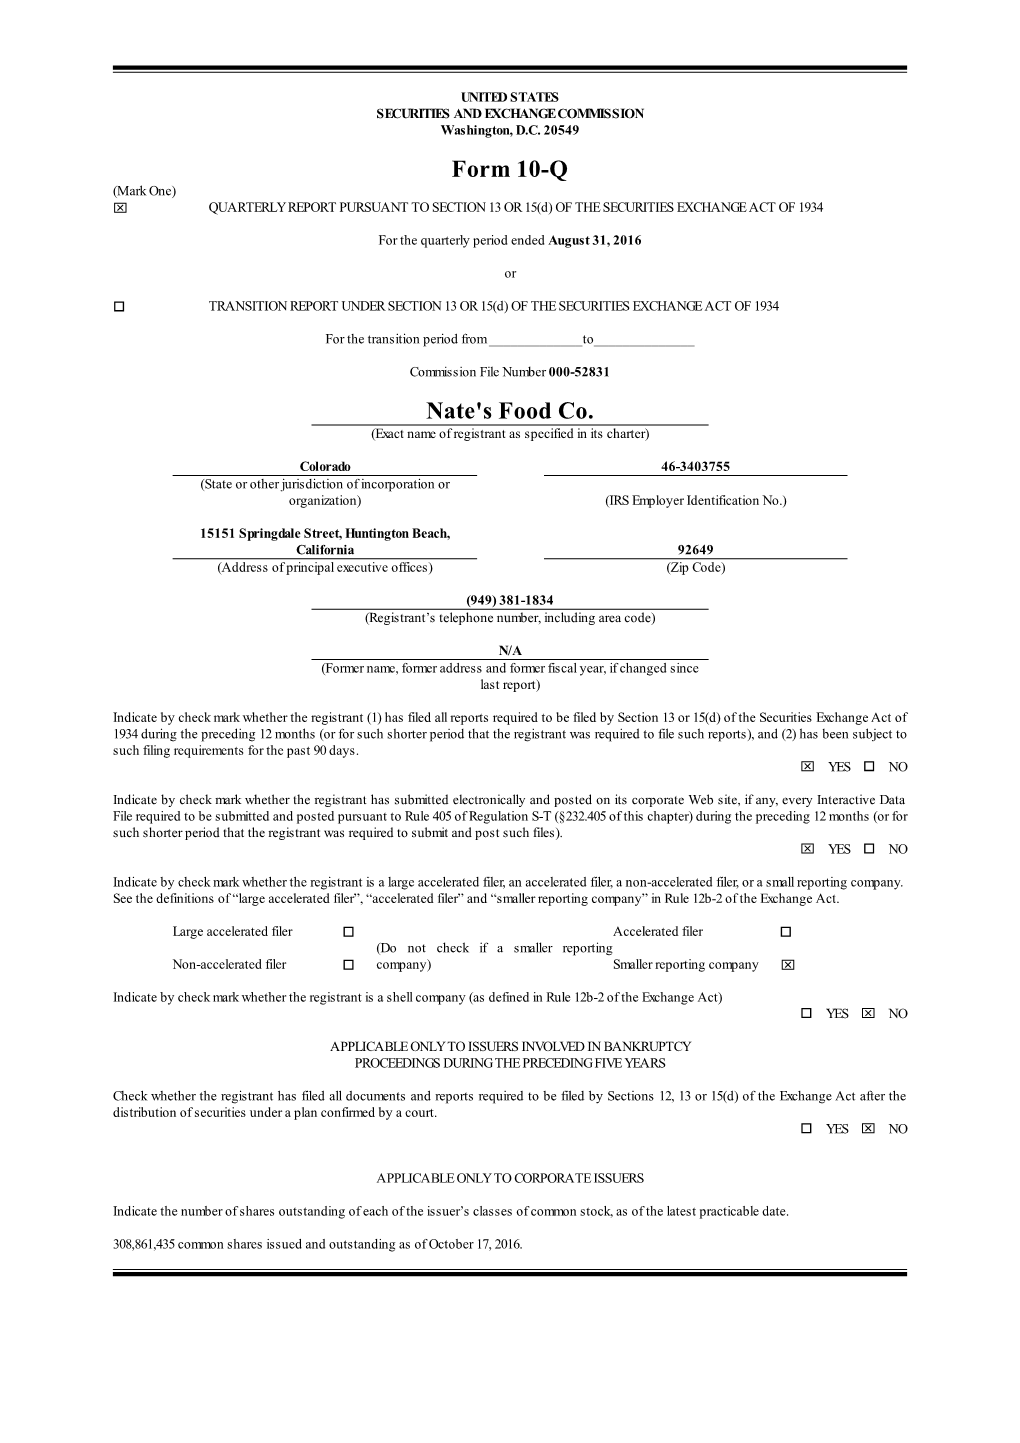 Nate's Food Co. | Quarterly Report | Form 10-Q | 2016-08-31